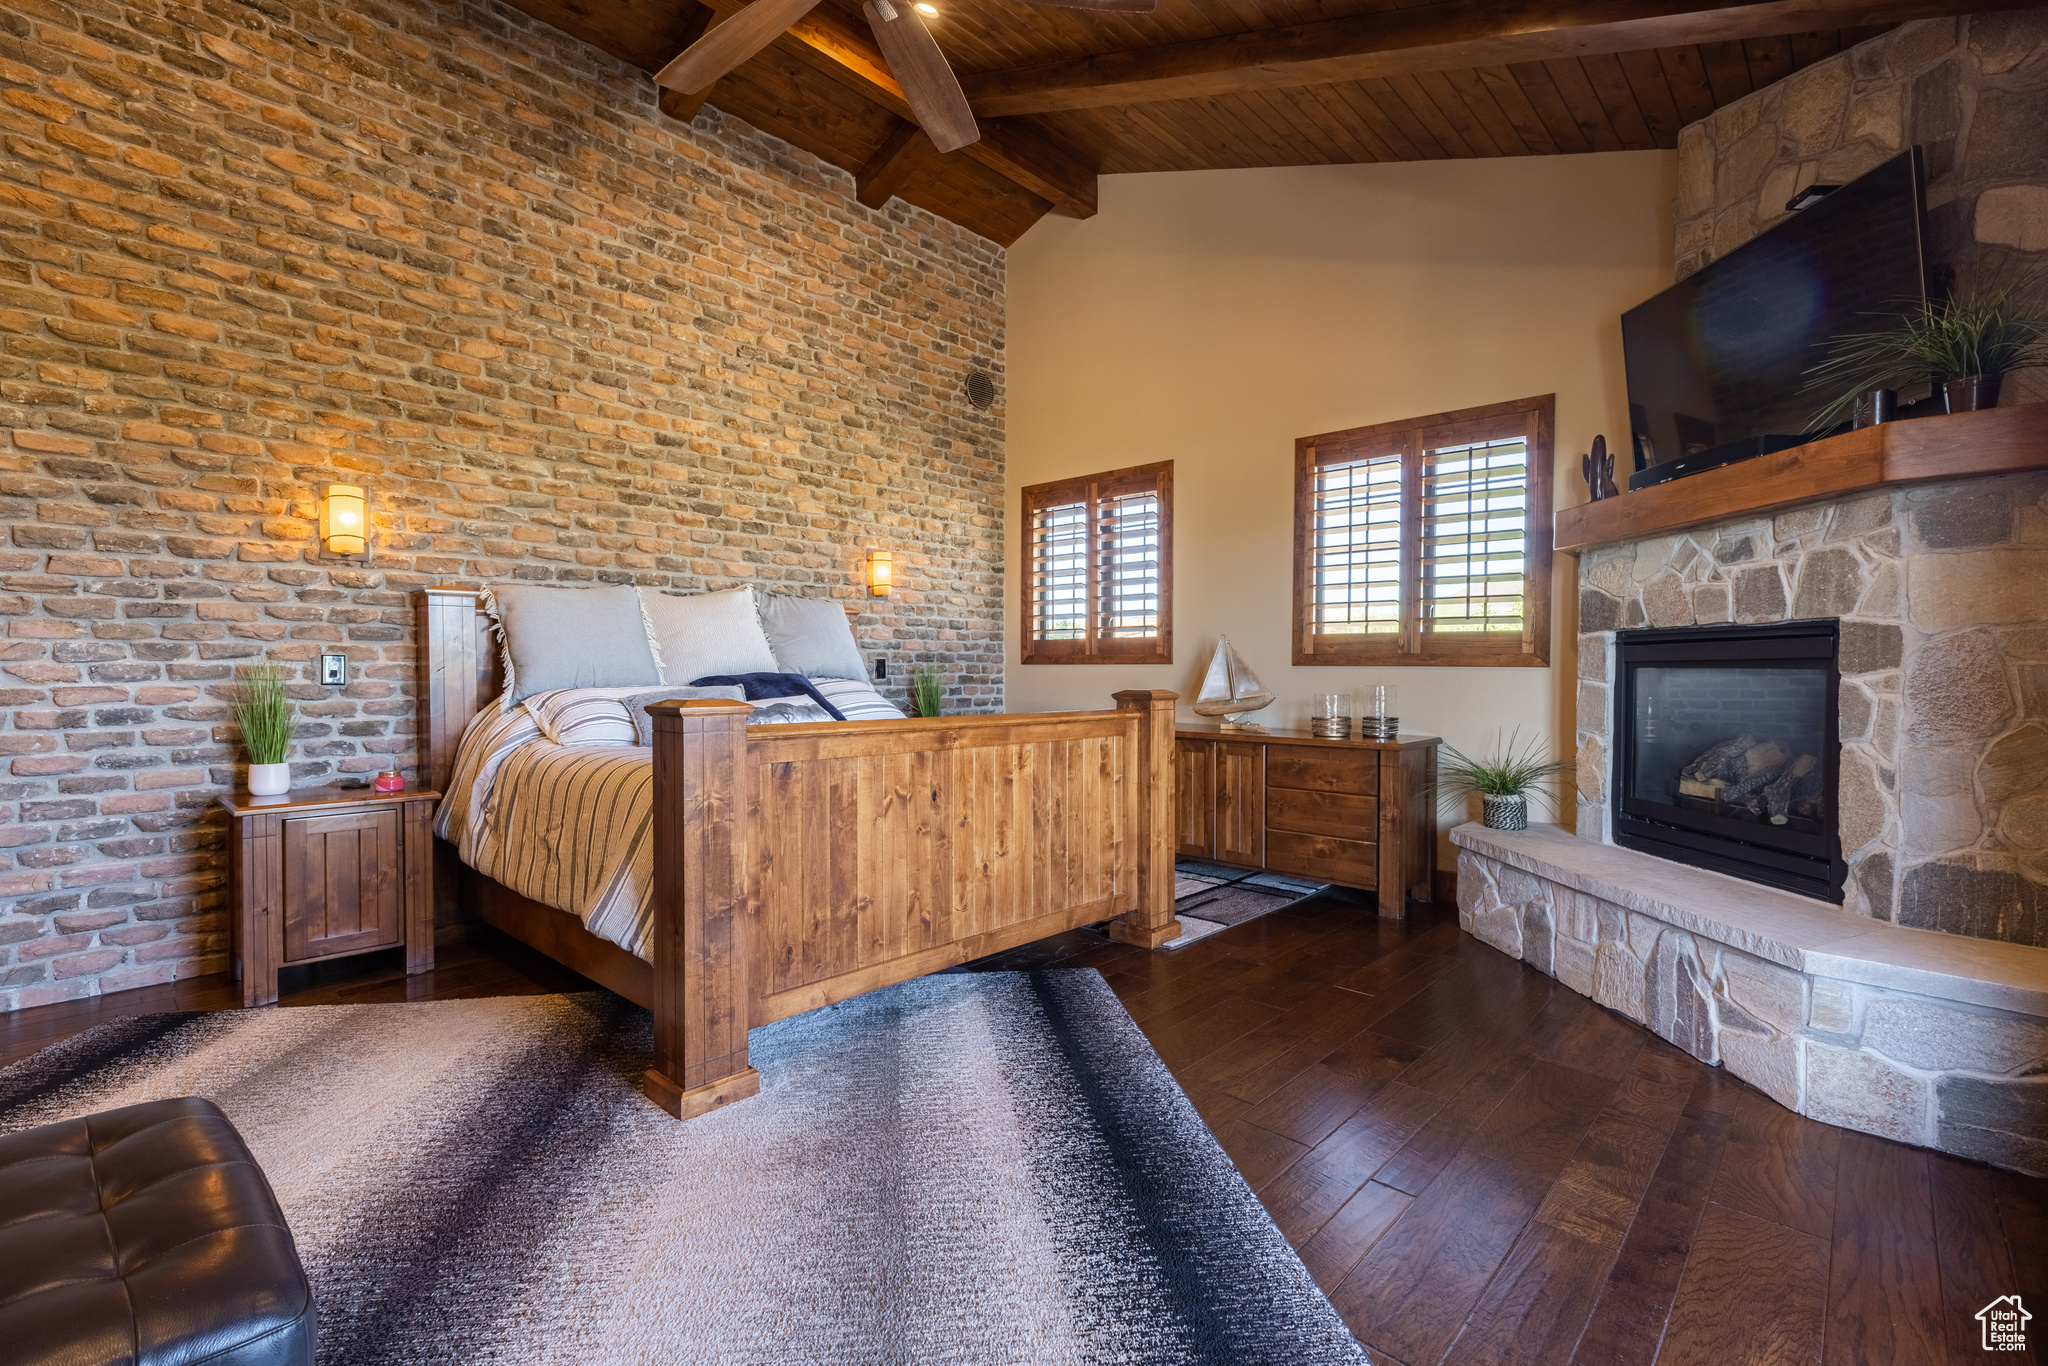 Principle Bedroom suite 2nd view with a stone fireplace, high vaulted ceiling, beam ceiling, dark hardwood / wood-style floors, and wooden ceiling